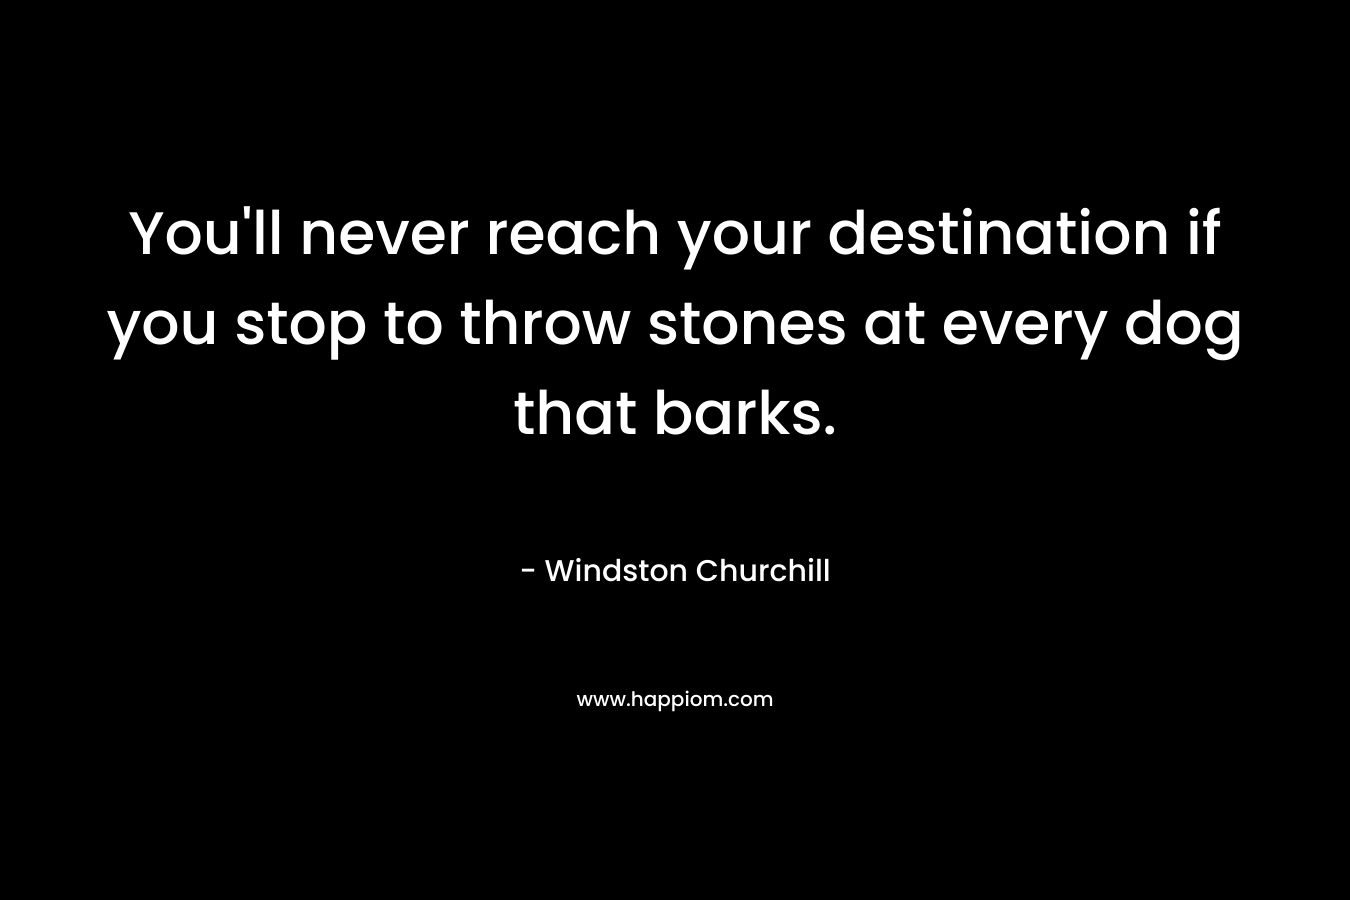 You'll never reach your destination if you stop to throw stones at every dog that barks.